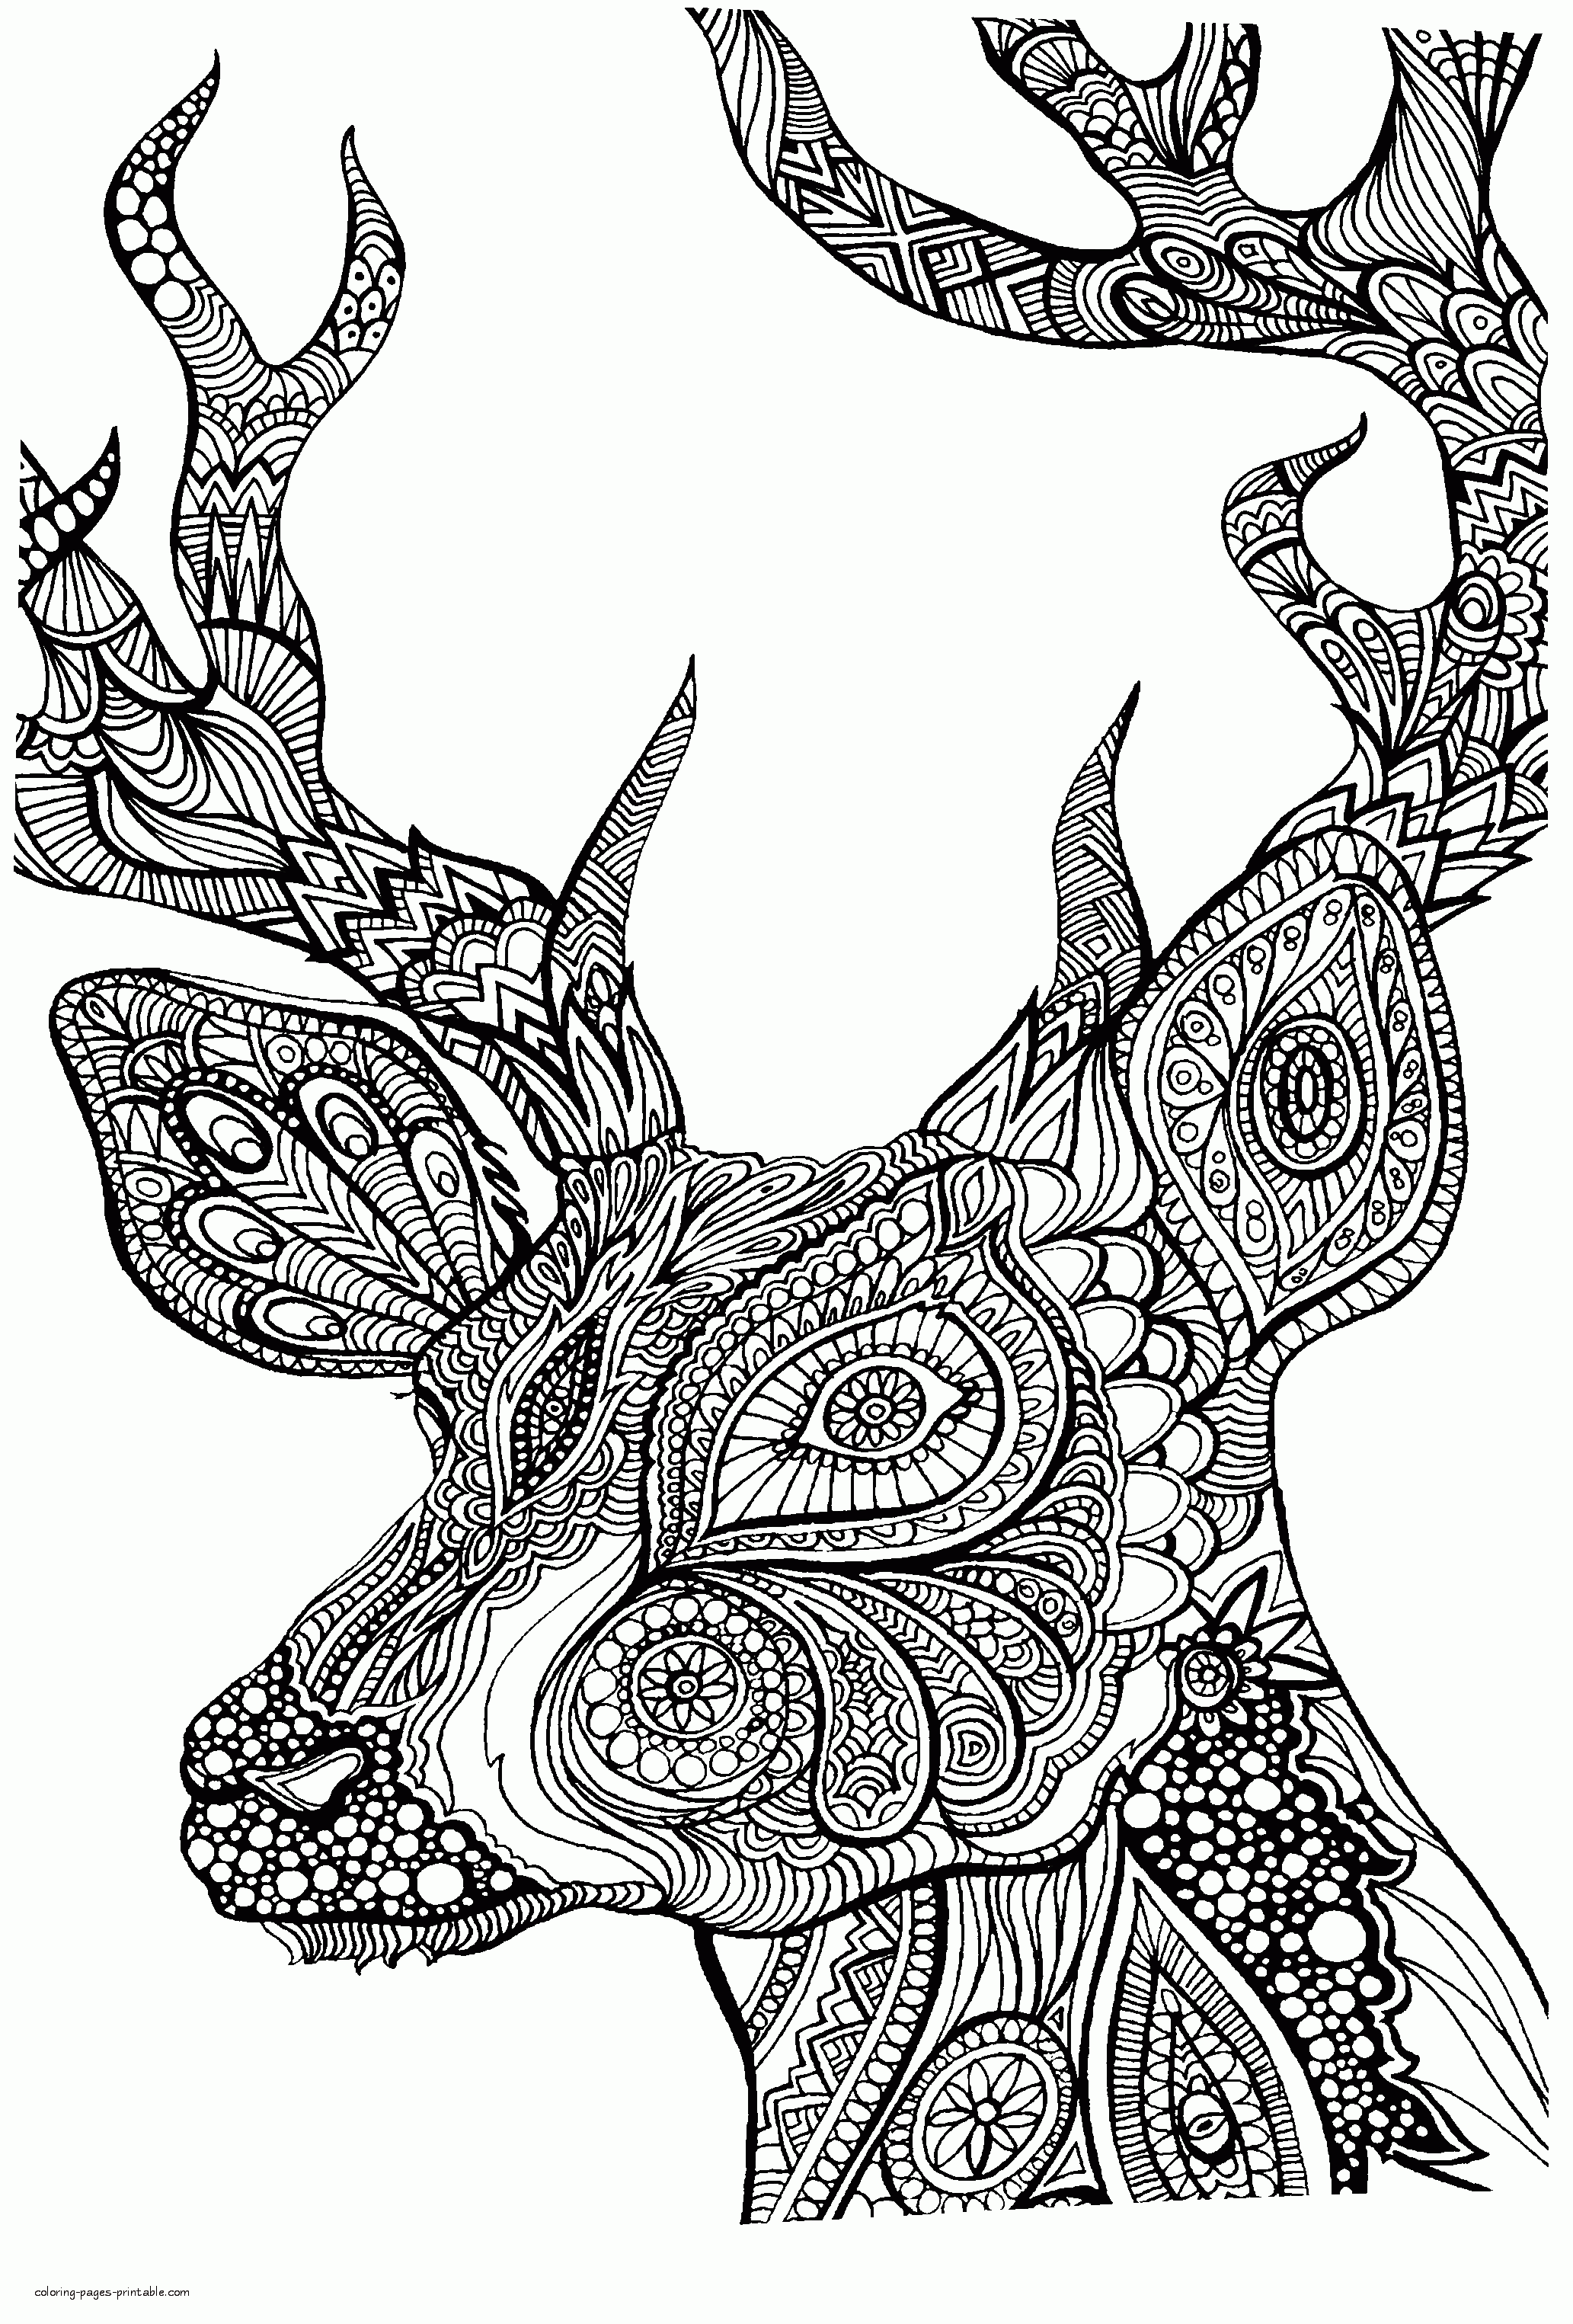 Free Animal Adult Coloring Pages With Deer    COLORING PAGES ...